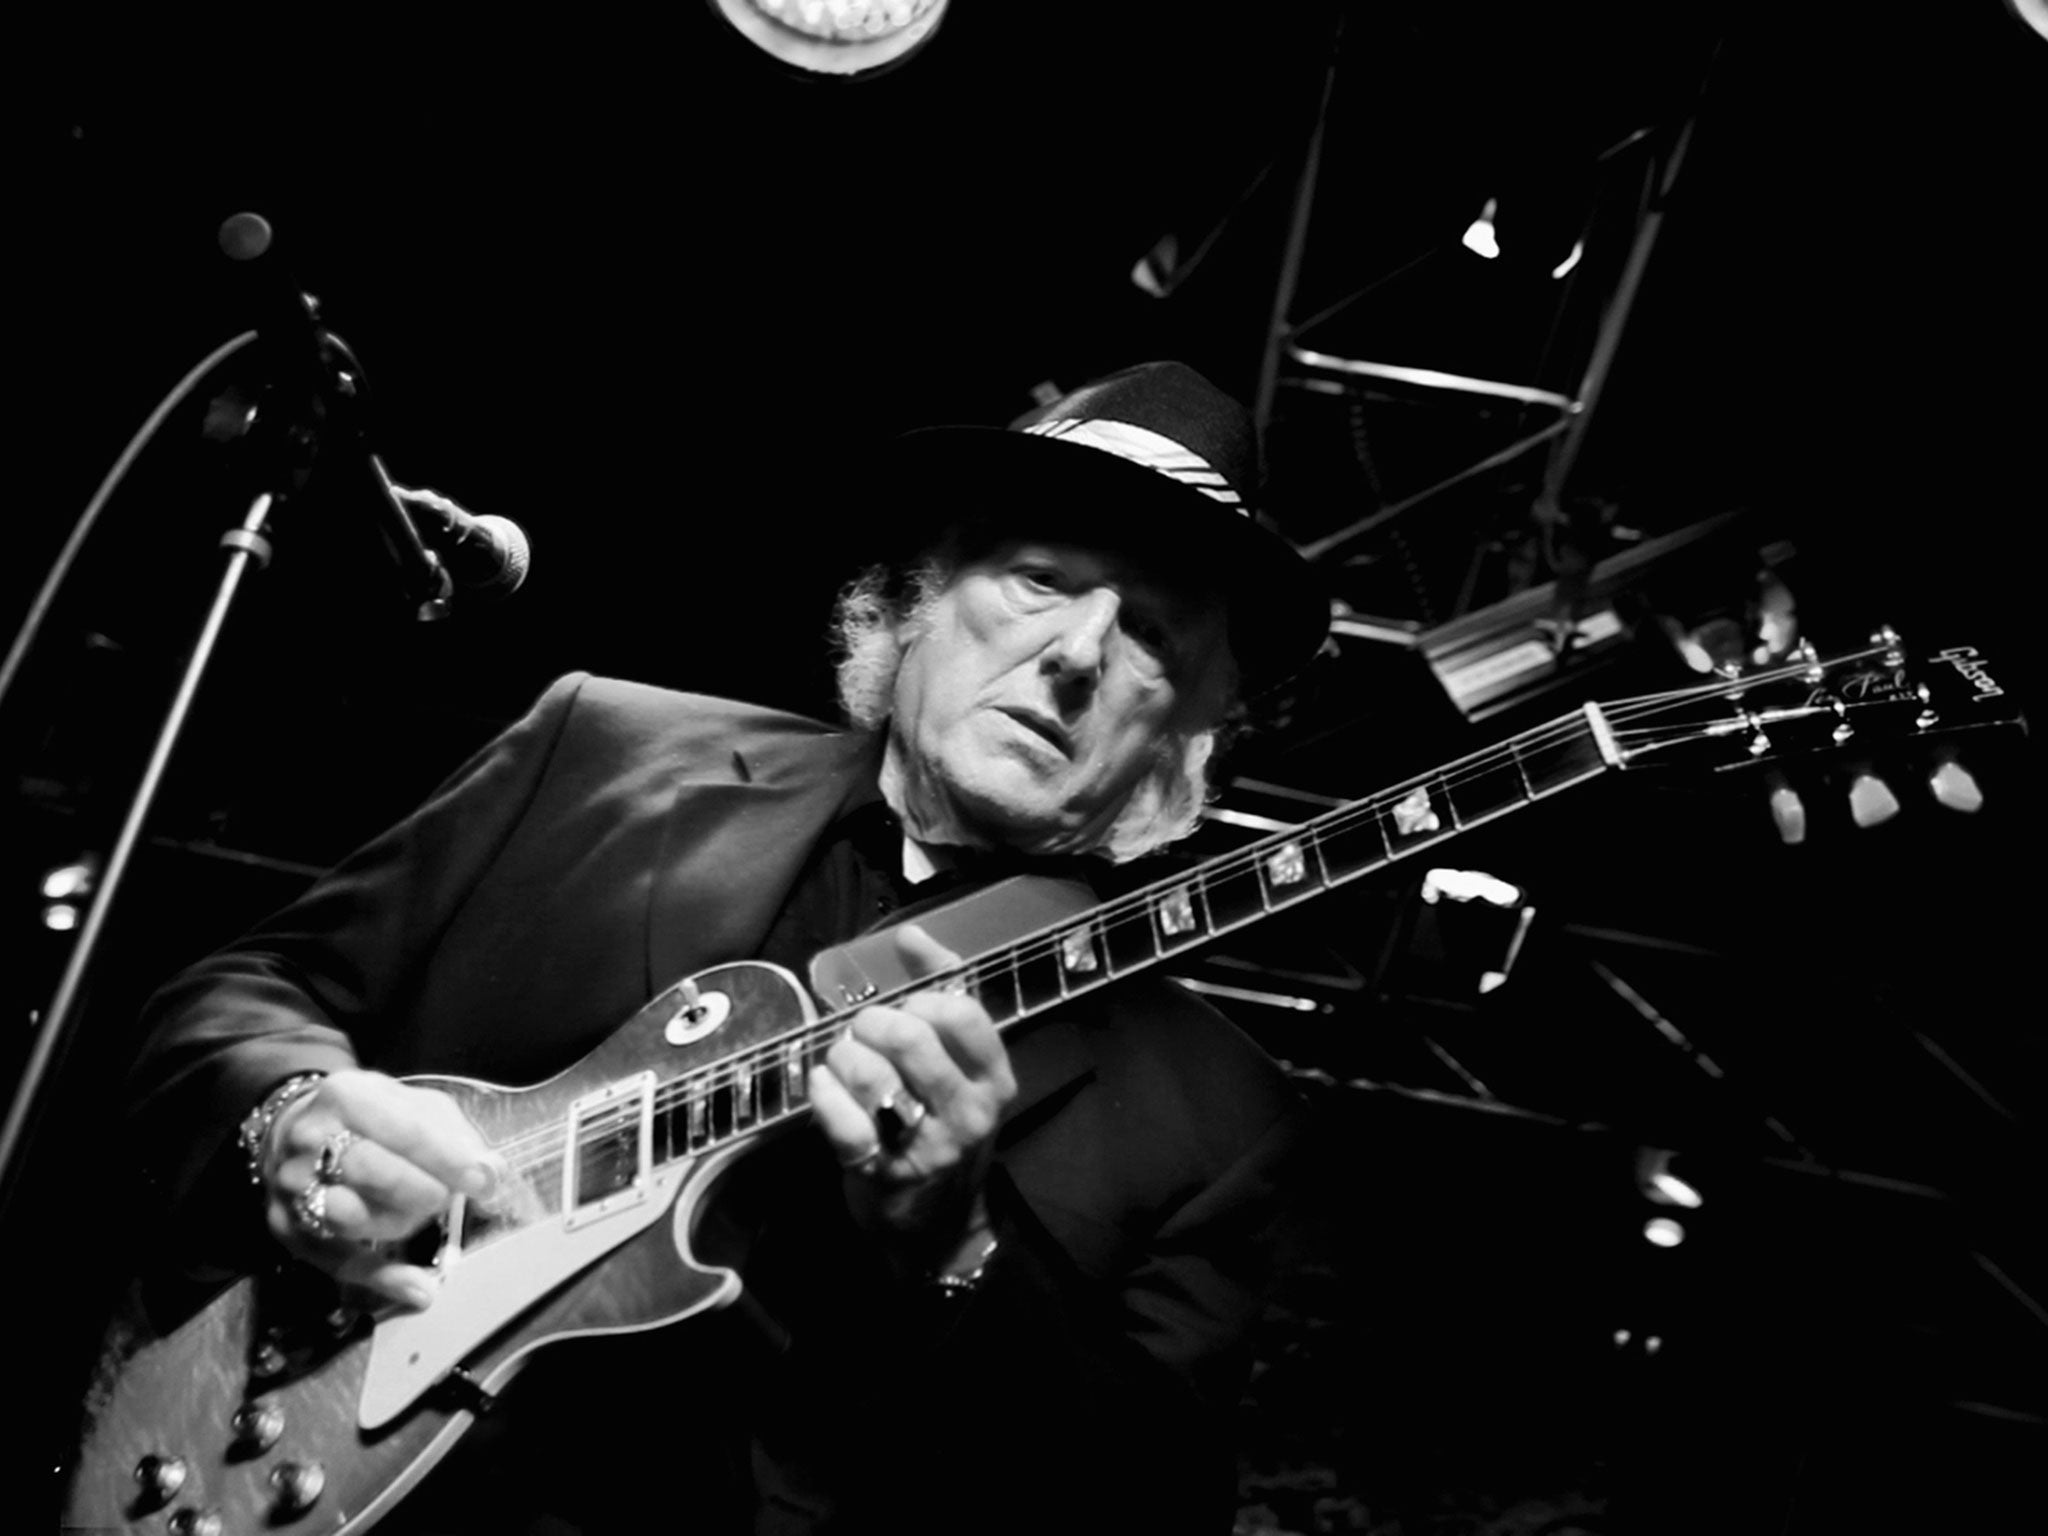 Dick Wagner in 2013: he had retrained himself to play
the guitar following a stroke